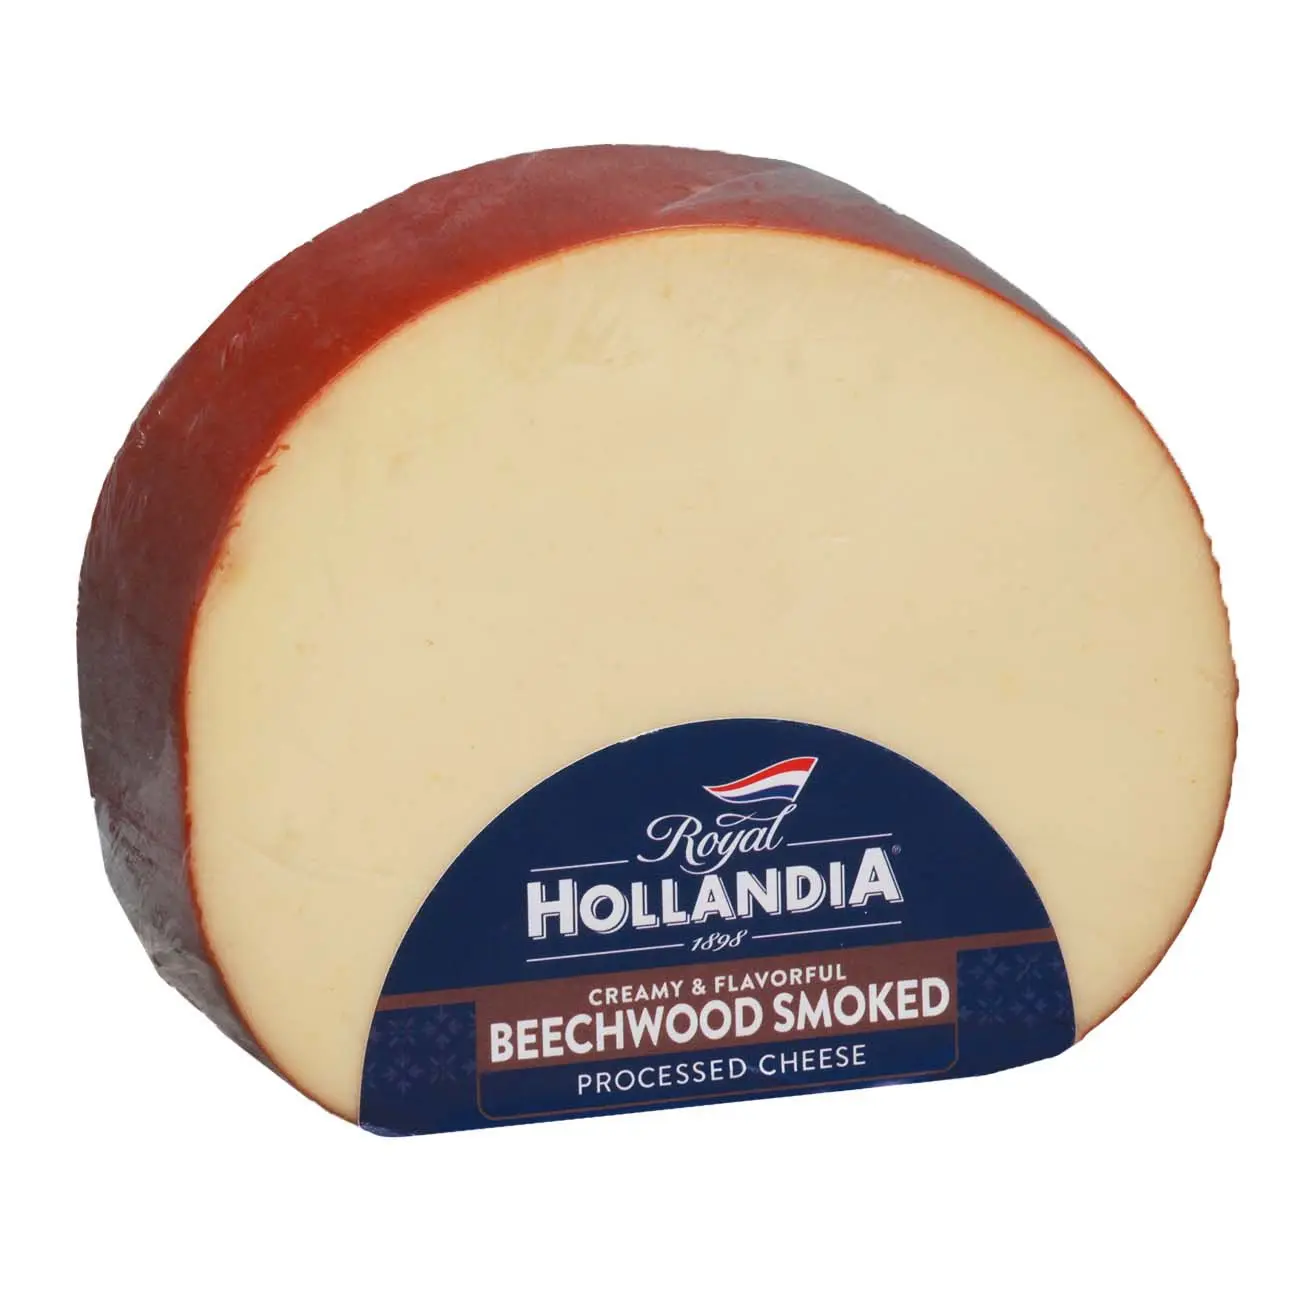 dutch smoked processed cheese - What goes with Dutch smoked cheese